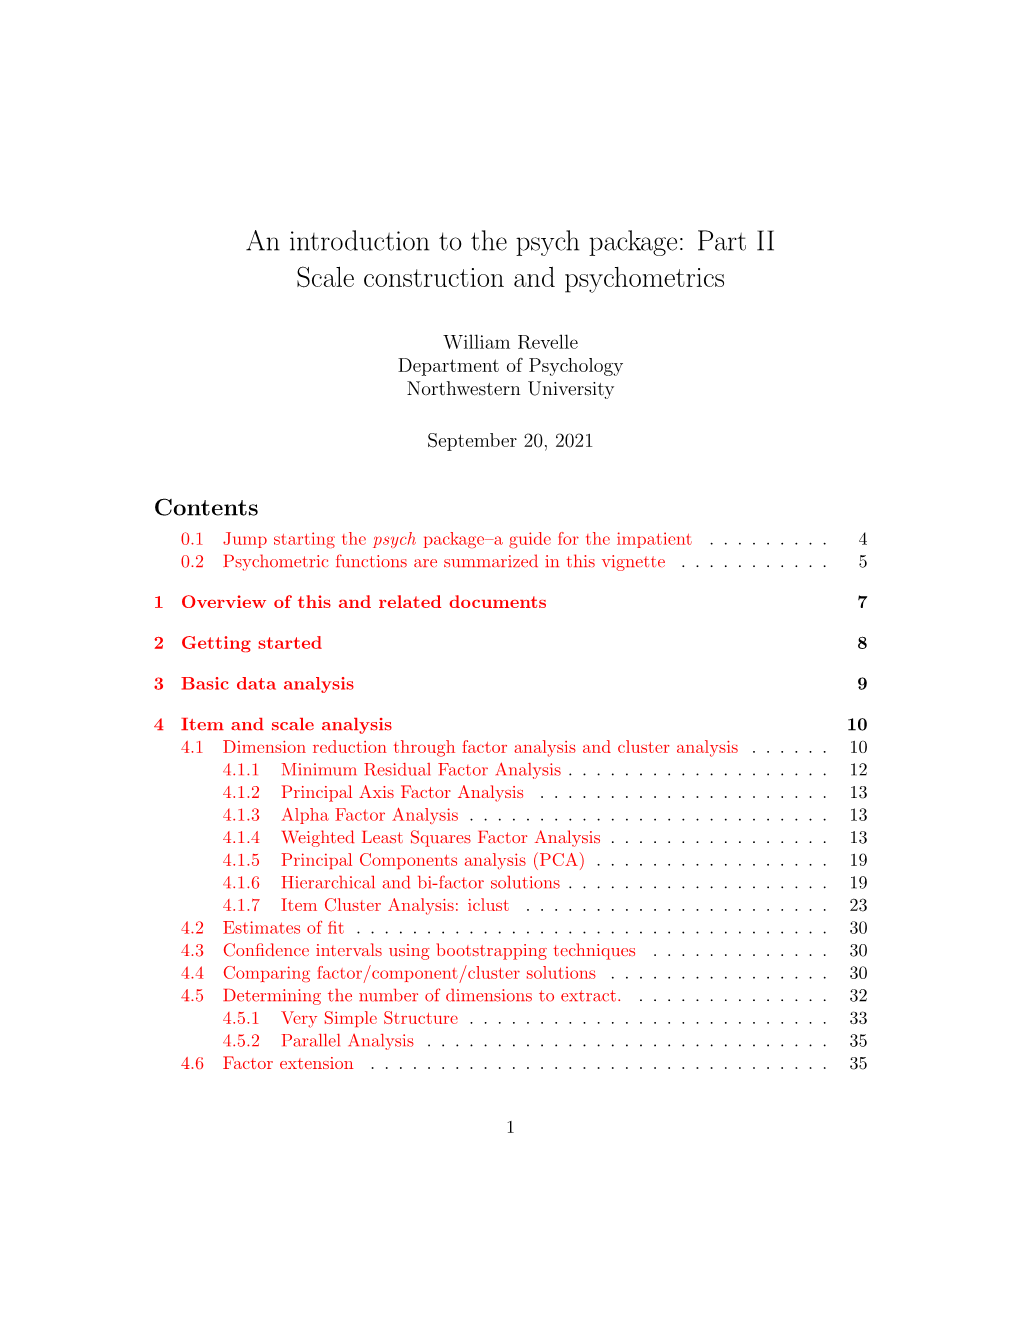 An Introduction to the Psych Package: Part II Scale Construction and Psychometrics